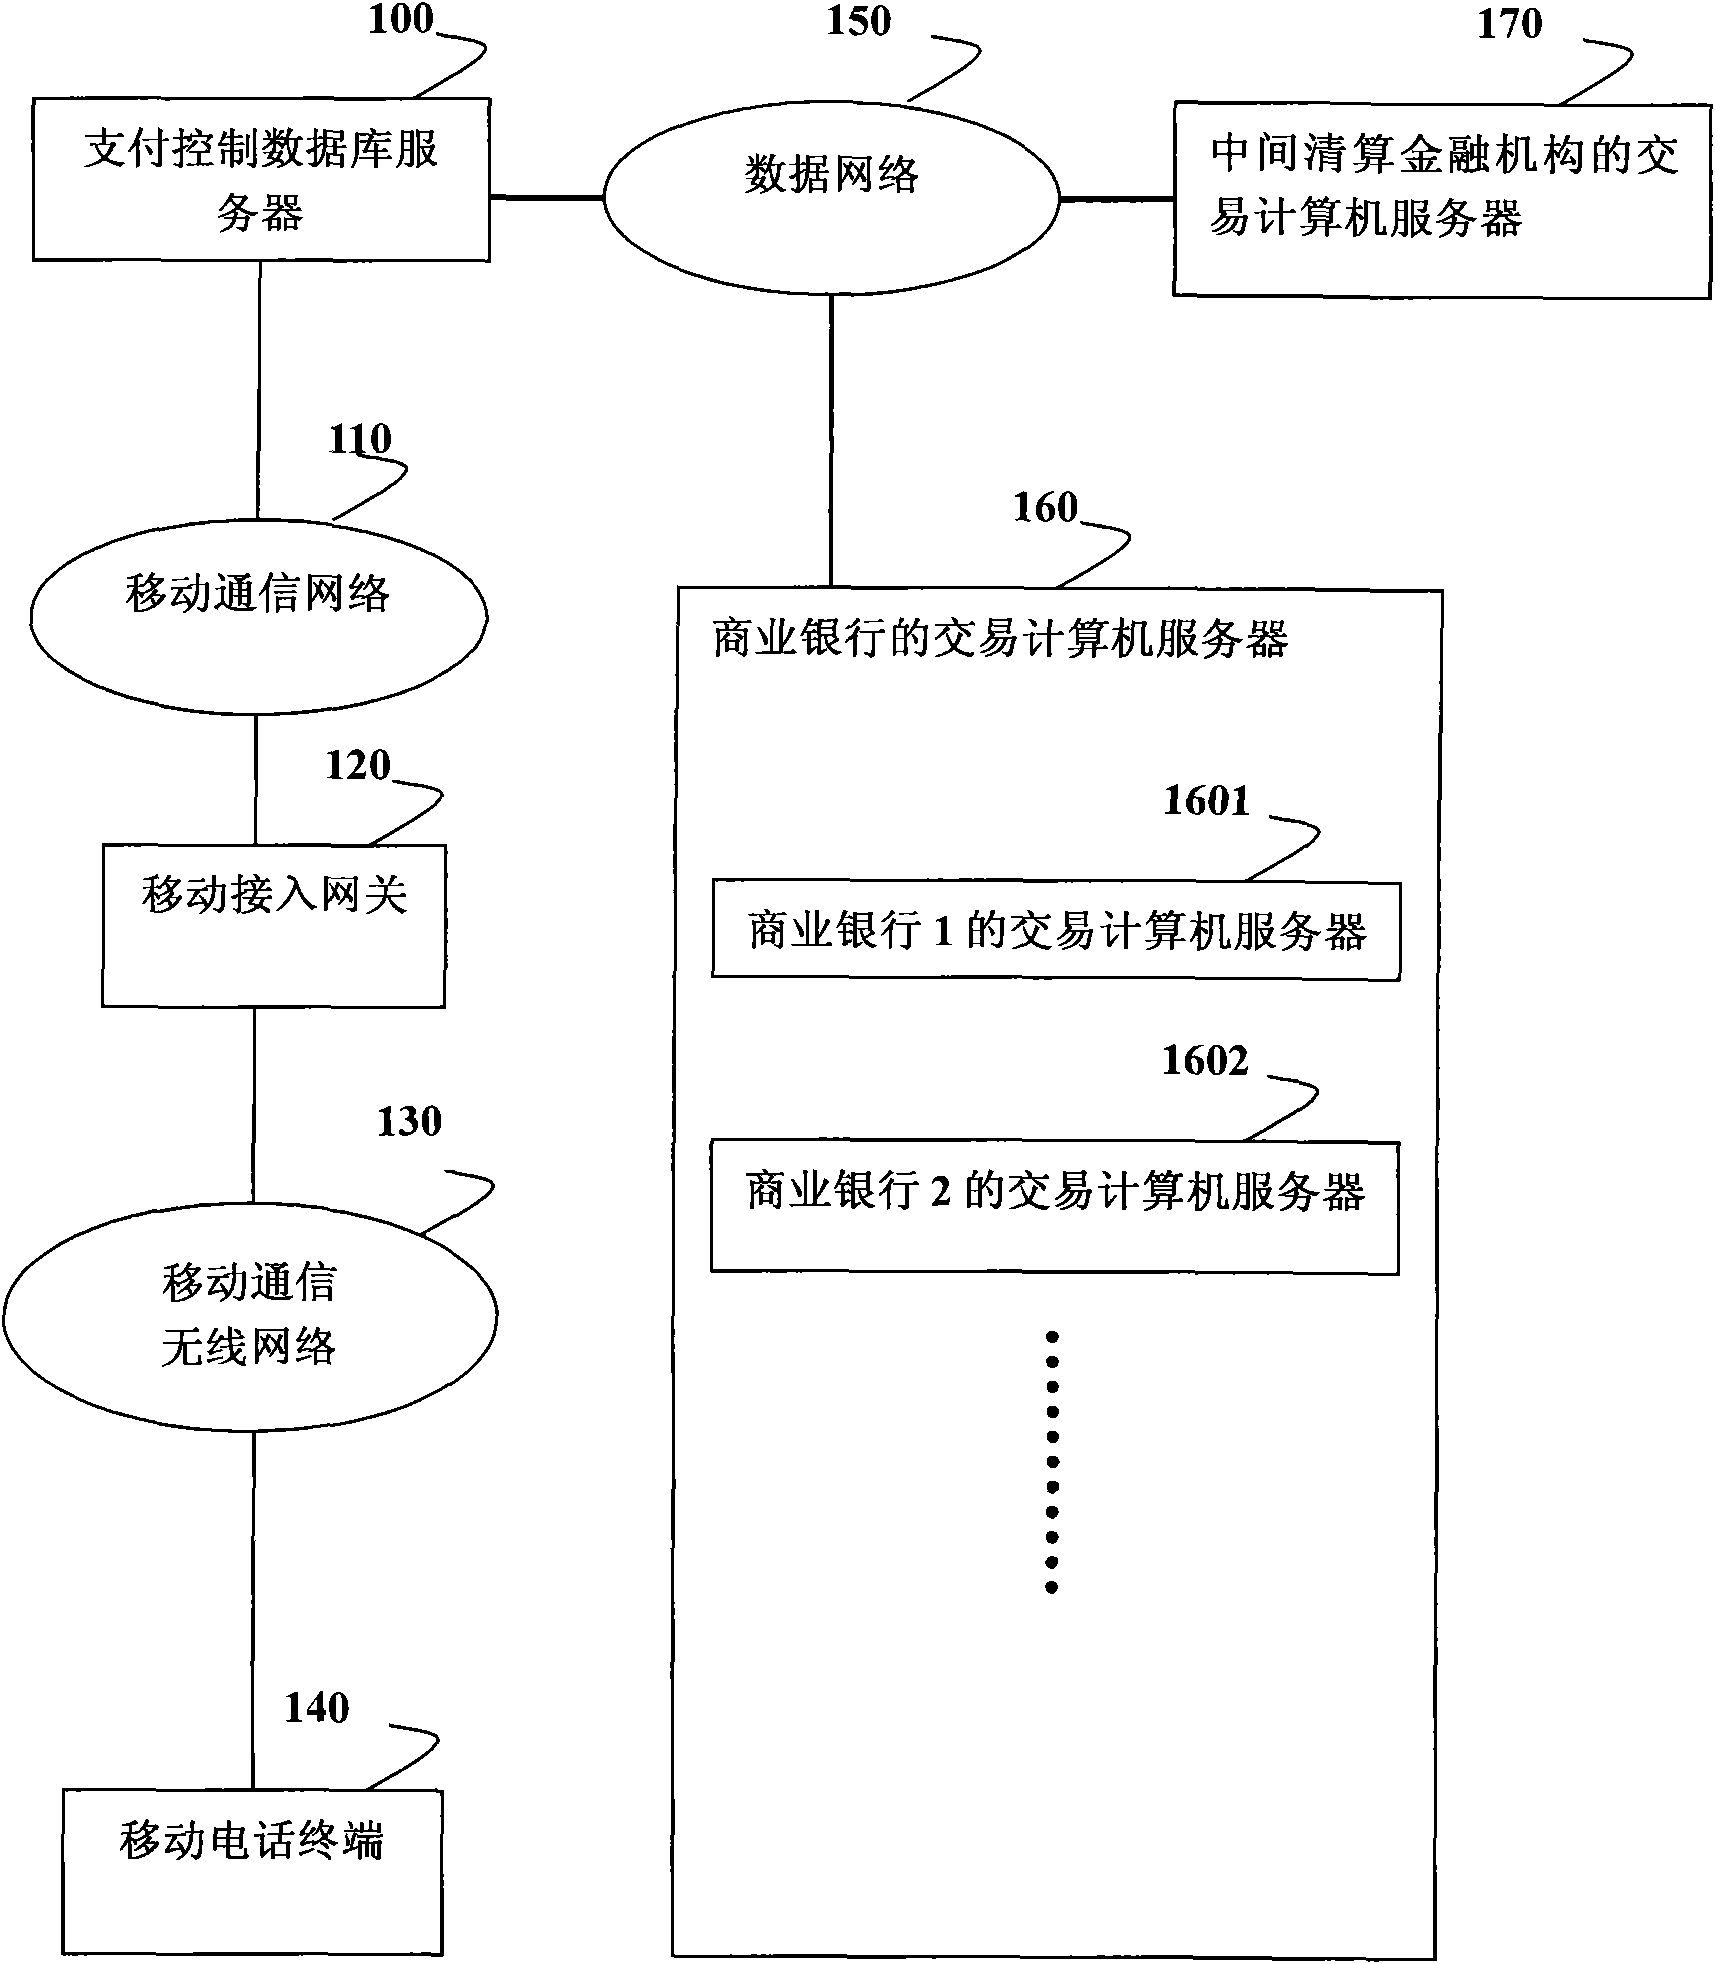 Method for user to control payment or transfer by using mobile phone terminal